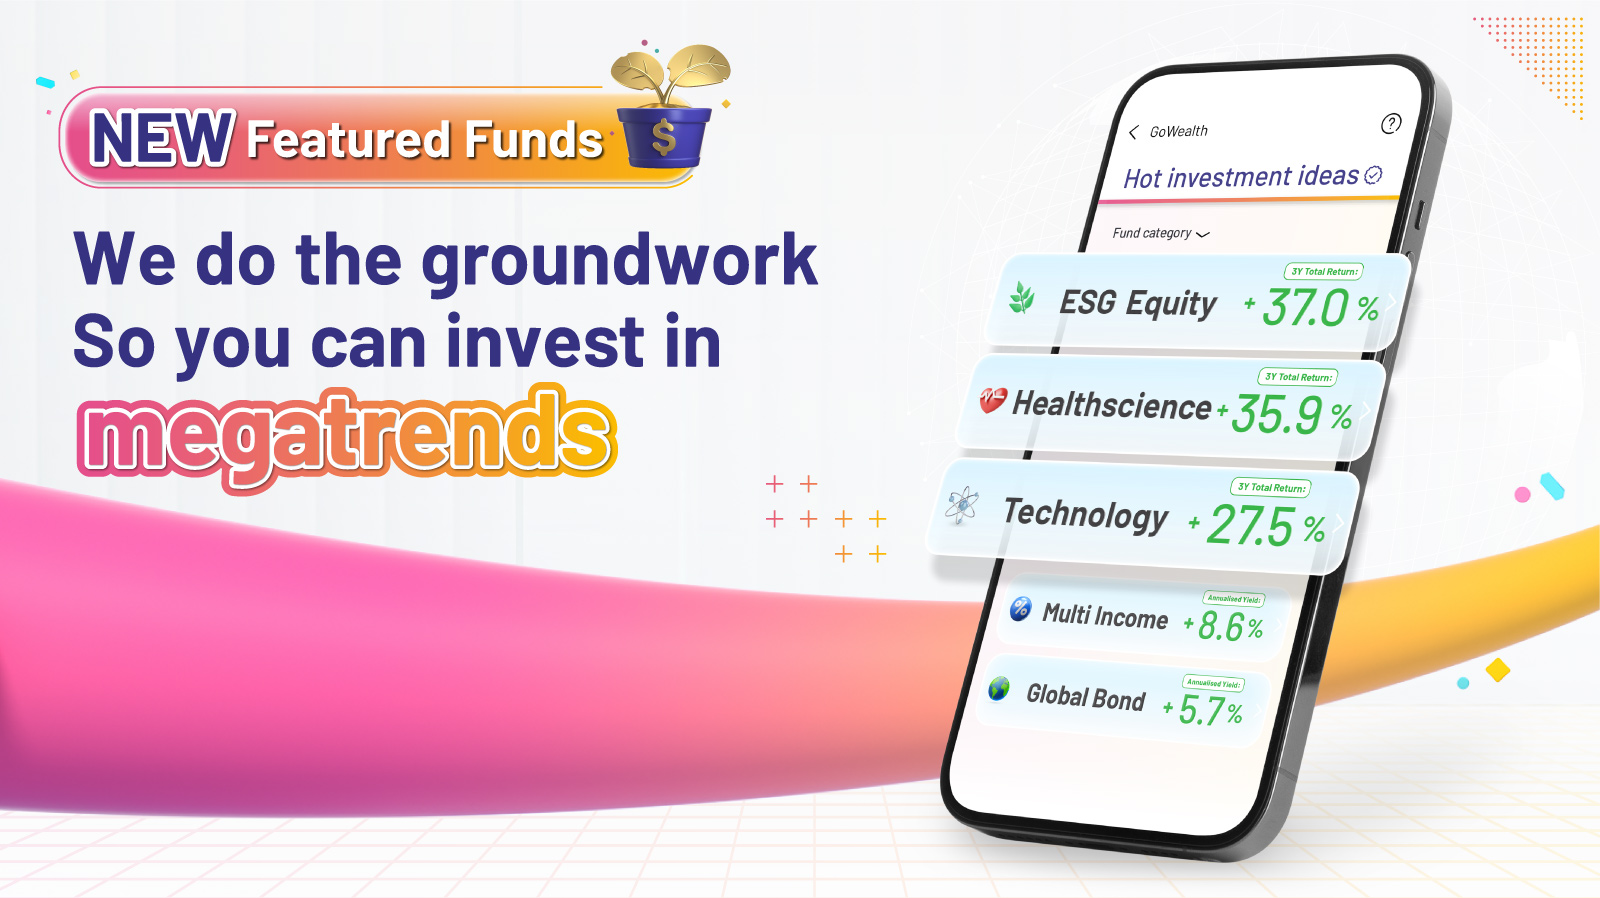 Featured funds platform is officially launched!